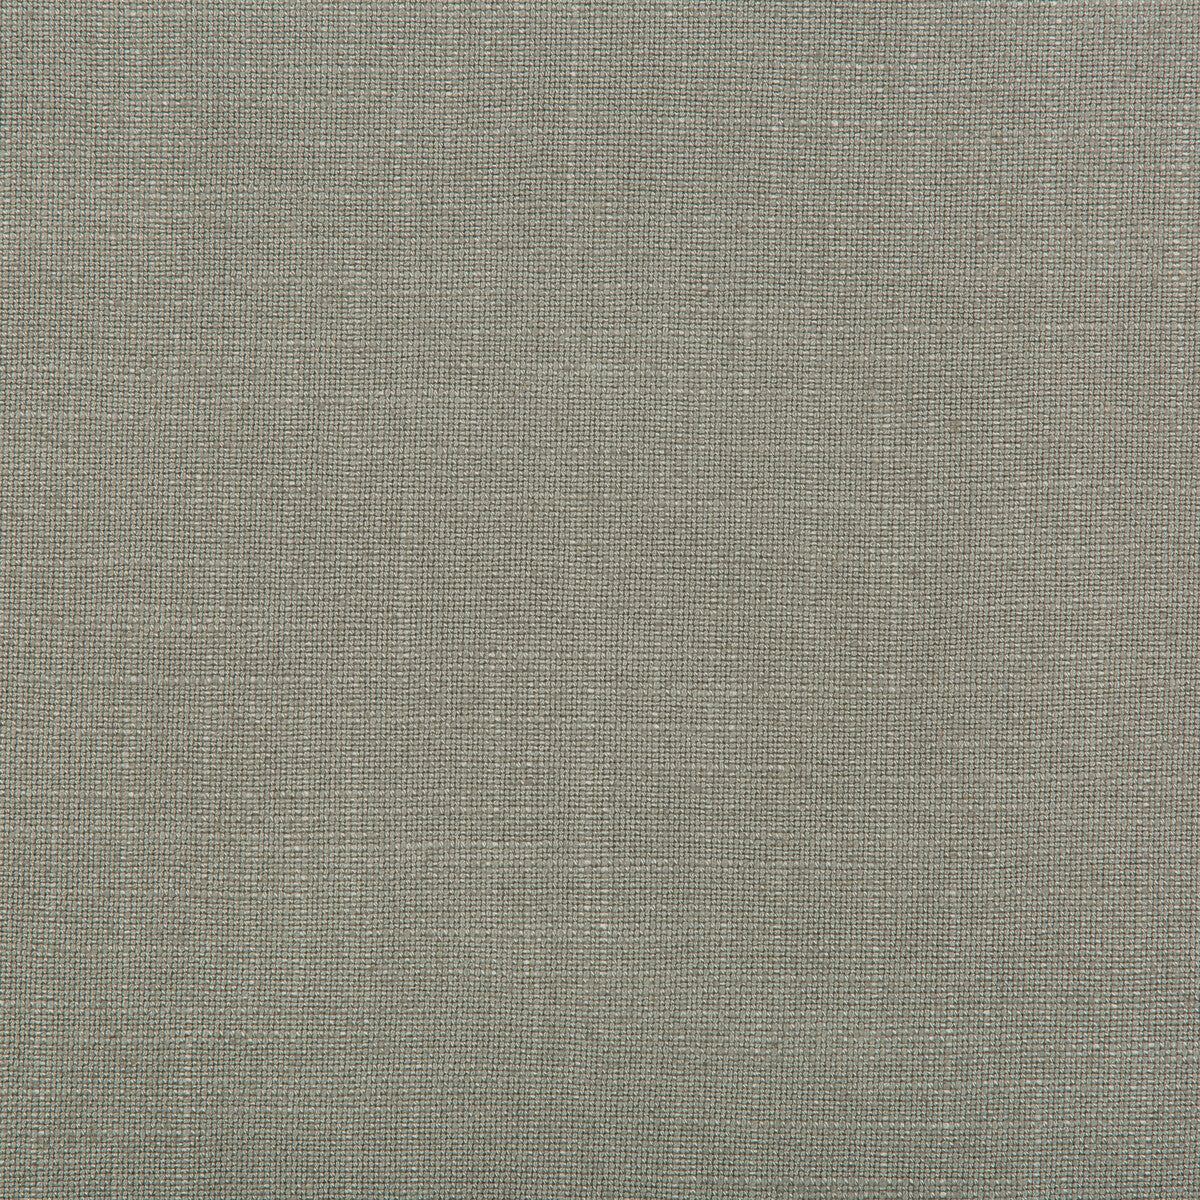 Aura fabric in seal color - pattern 35520.2121.0 - by Kravet Design